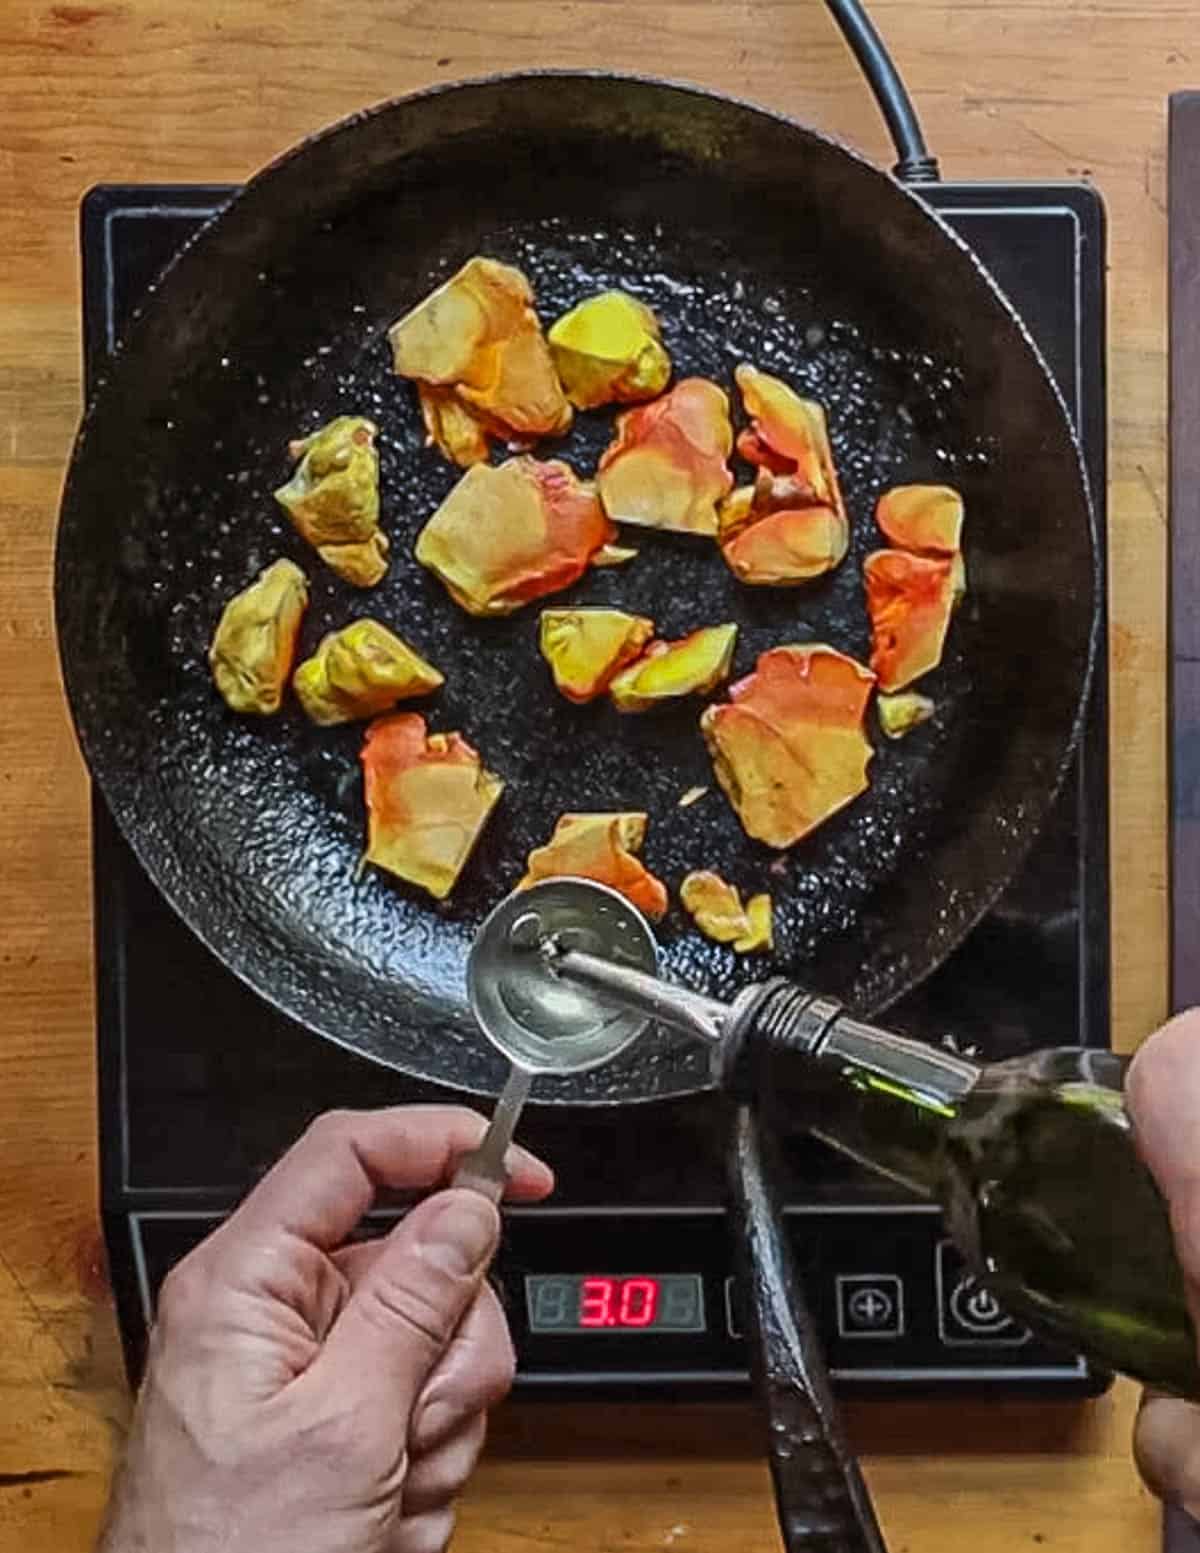 Adding oil to a pan of yellow and orange mushrooms cooking in a pan. 